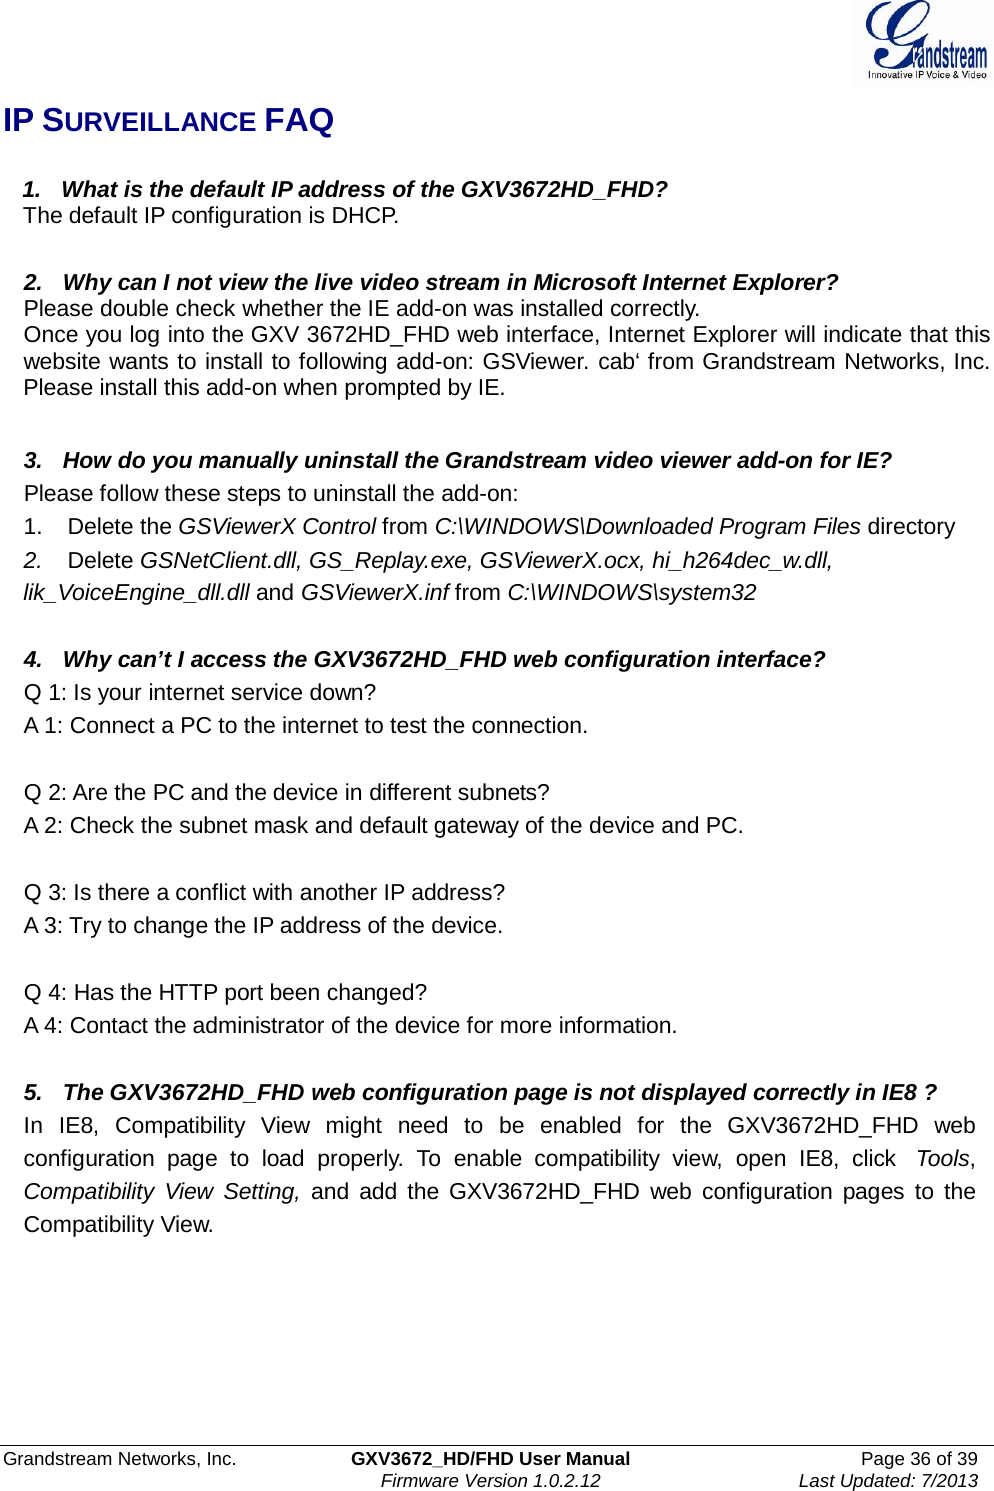  Grandstream Networks, Inc. GXV3672_HD/FHD User Manual Page 36 of 39   Firmware Version 1.0.2.12 Last Updated: 7/2013  IP SURVEILLANCE FAQ     1.   What is the default IP address of the GXV3672HD_FHD?    The default IP configuration is DHCP.   2.   Why can I not view the live video stream in Microsoft Internet Explorer? Please double check whether the IE add-on was installed correctly. Once you log into the GXV 3672HD_FHD web interface, Internet Explorer will indicate that this website wants to install to following add-on: GSViewer. cab‘ from Grandstream Networks, Inc. Please install this add-on when prompted by IE.   3.   How do you manually uninstall the Grandstream video viewer add-on for IE? Please follow these steps to uninstall the add-on: 1.    Delete the GSViewerX Control from C:\WINDOWS\Downloaded Program Files directory 2.   Delete GSNetClient.dll, GS_Replay.exe, GSViewerX.ocx, hi_h264dec_w.dll, lik_VoiceEngine_dll.dll and GSViewerX.inf from C:\WINDOWS\system32   4.   Why can’t I access the GXV3672HD_FHD web configuration interface? Q 1: Is your internet service down? A 1: Connect a PC to the internet to test the connection.   Q 2: Are the PC and the device in different subnets? A 2: Check the subnet mask and default gateway of the device and PC.   Q 3: Is there a conflict with another IP address? A 3: Try to change the IP address of the device.   Q 4: Has the HTTP port been changed? A 4: Contact the administrator of the device for more information.   5.   The GXV3672HD_FHD web configuration page is not displayed correctly in IE8 ? In  IE8,  Compatibility  View  might  need  to  be  enabled  for  the GXV3672HD_FHD  web configuration  page  to  load properly.  To  enable  compatibility  view,  open  IE8,  click  Tools, Compatibility  View  Setting, and  add  the GXV3672HD_FHD  web  configuration  pages  to  the Compatibility View.   